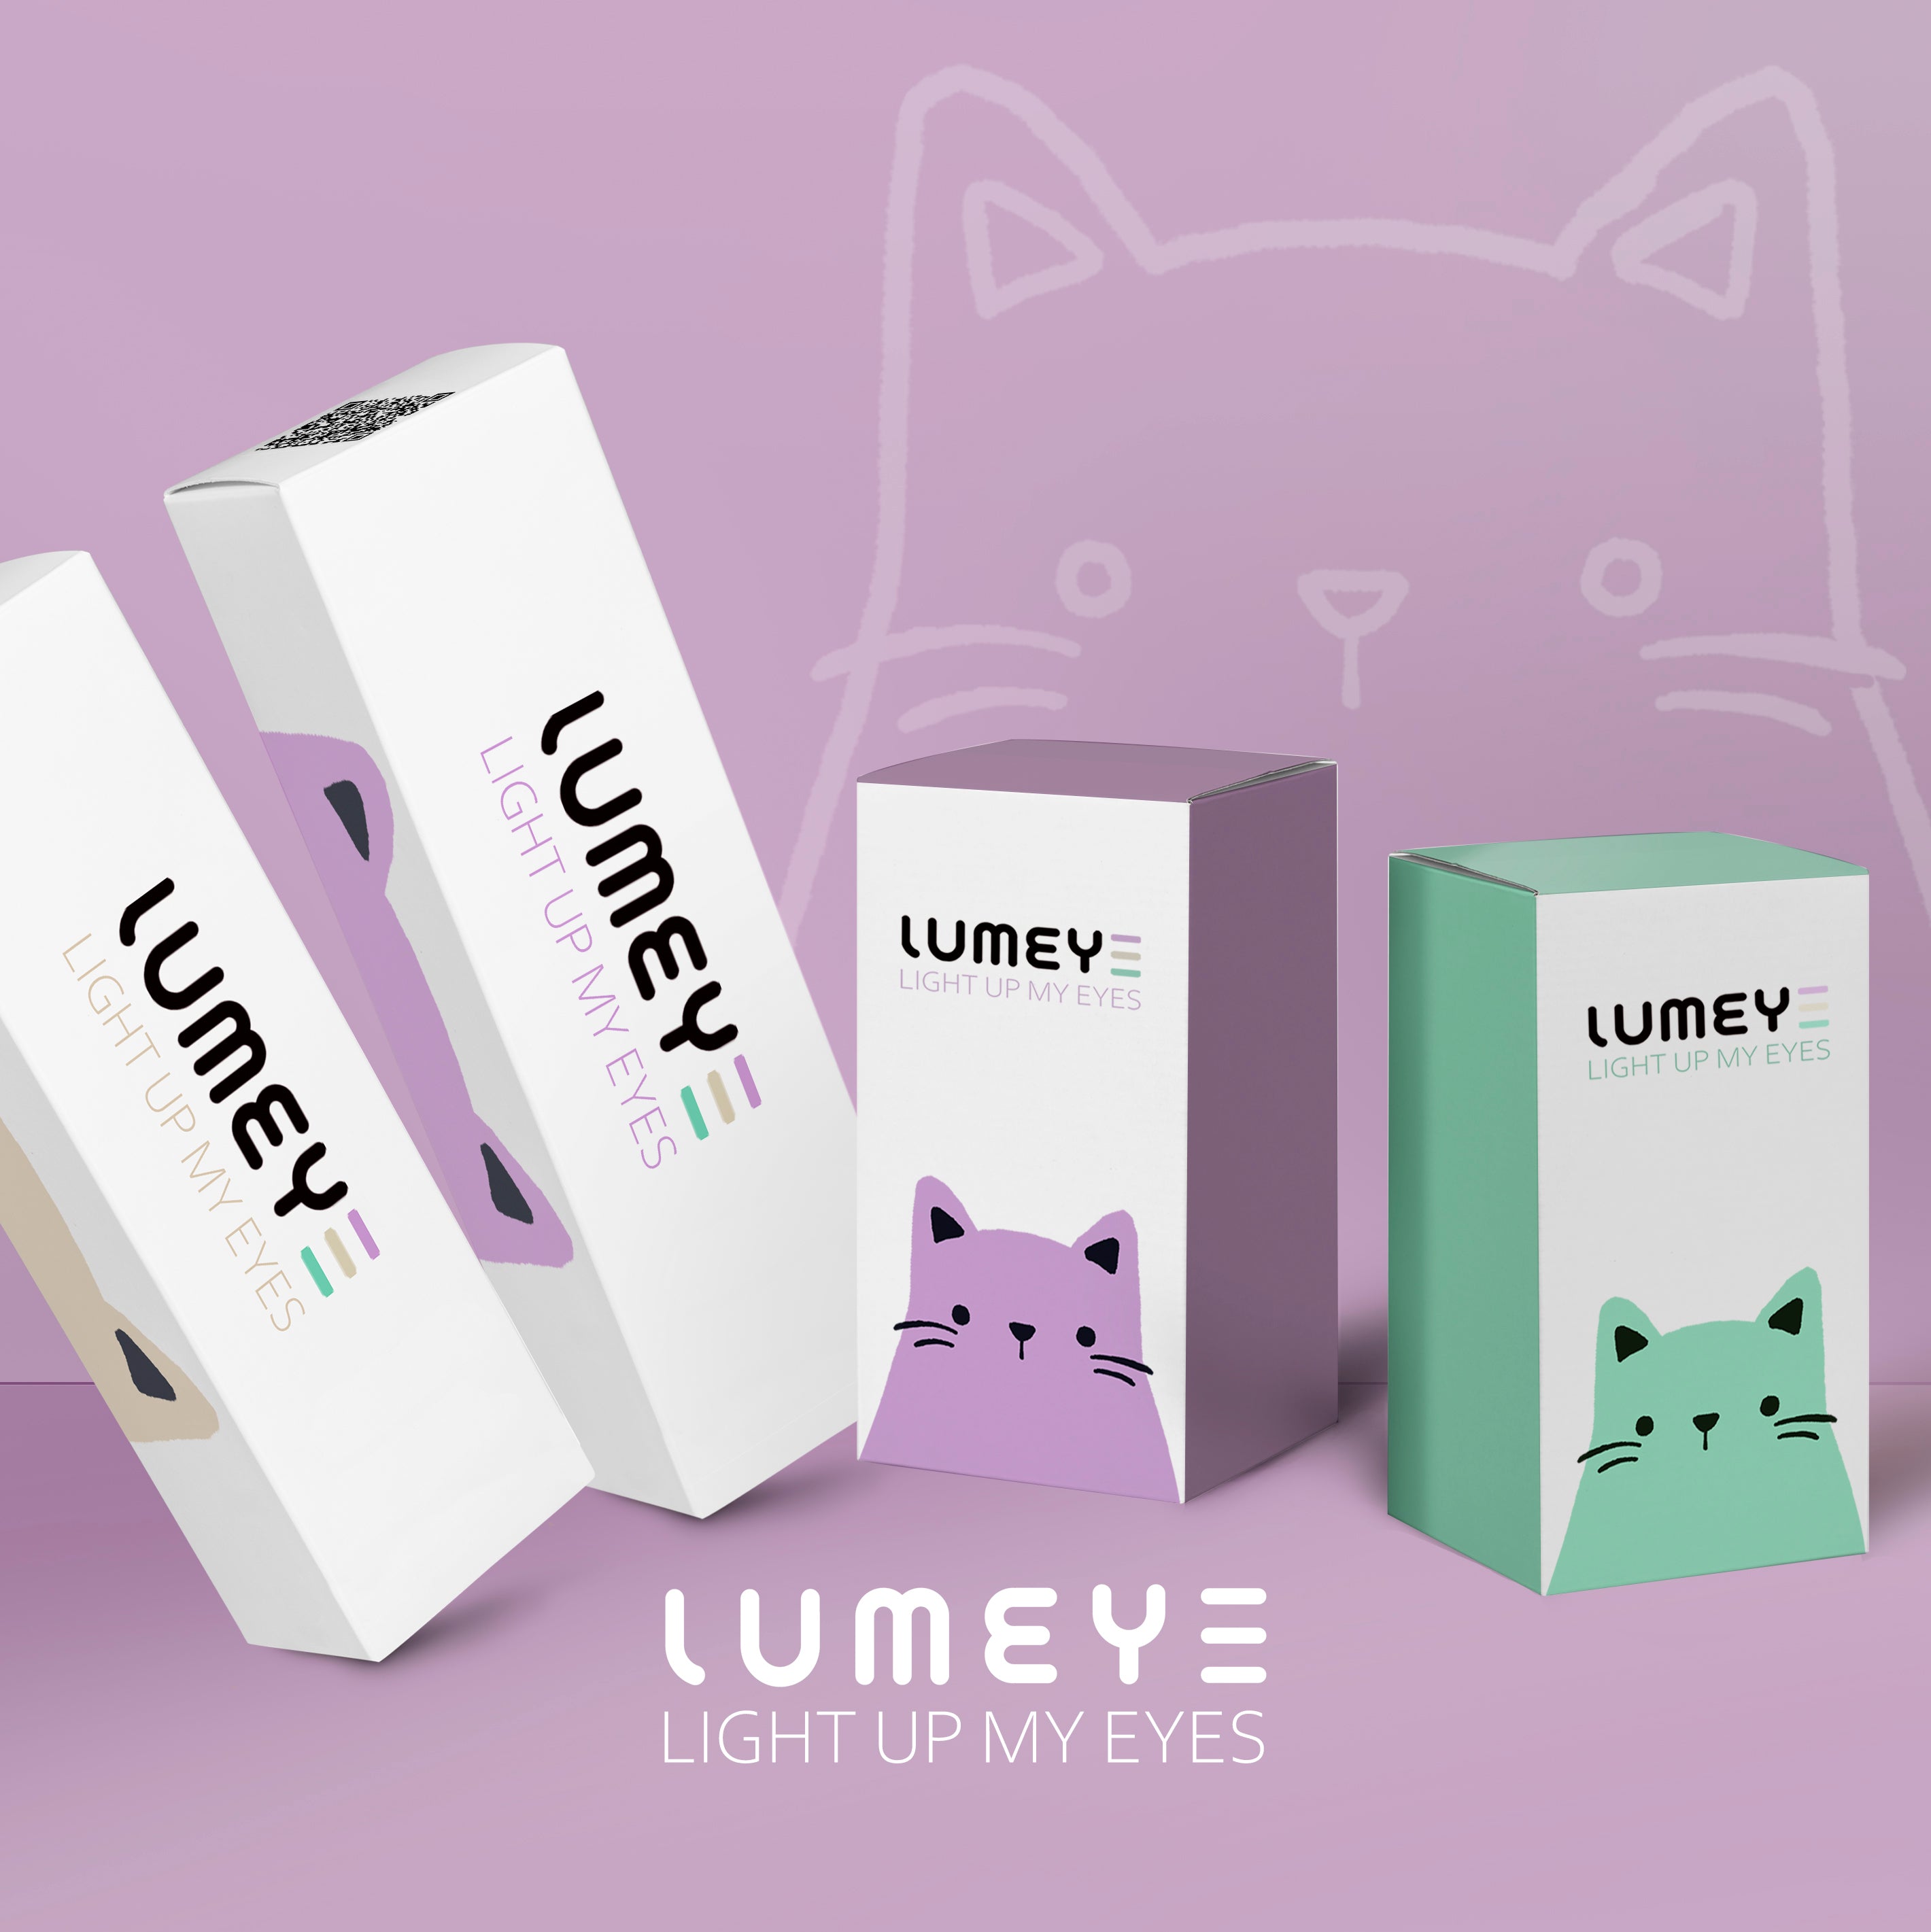 Best COLORED CONTACTS - LUMEYE Soda Brown Colored Contact Lenses - LUMEYE